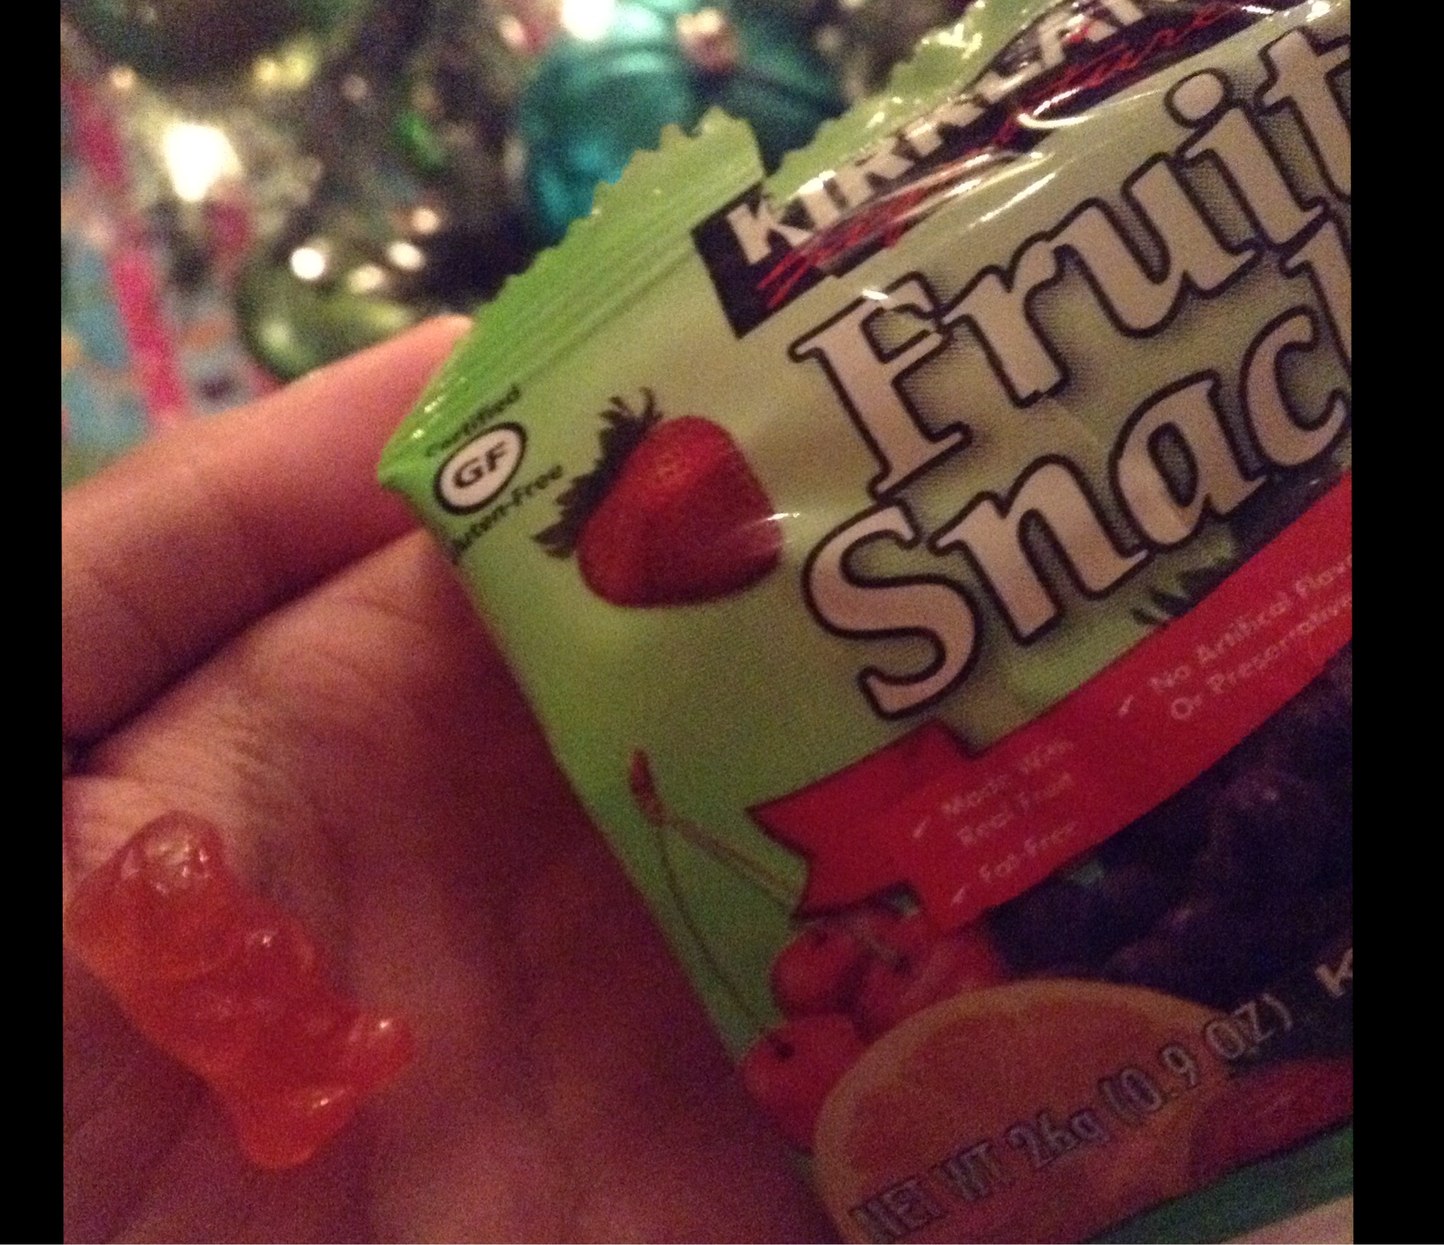 found a gummy bear in a pack of fruit snacks - meme